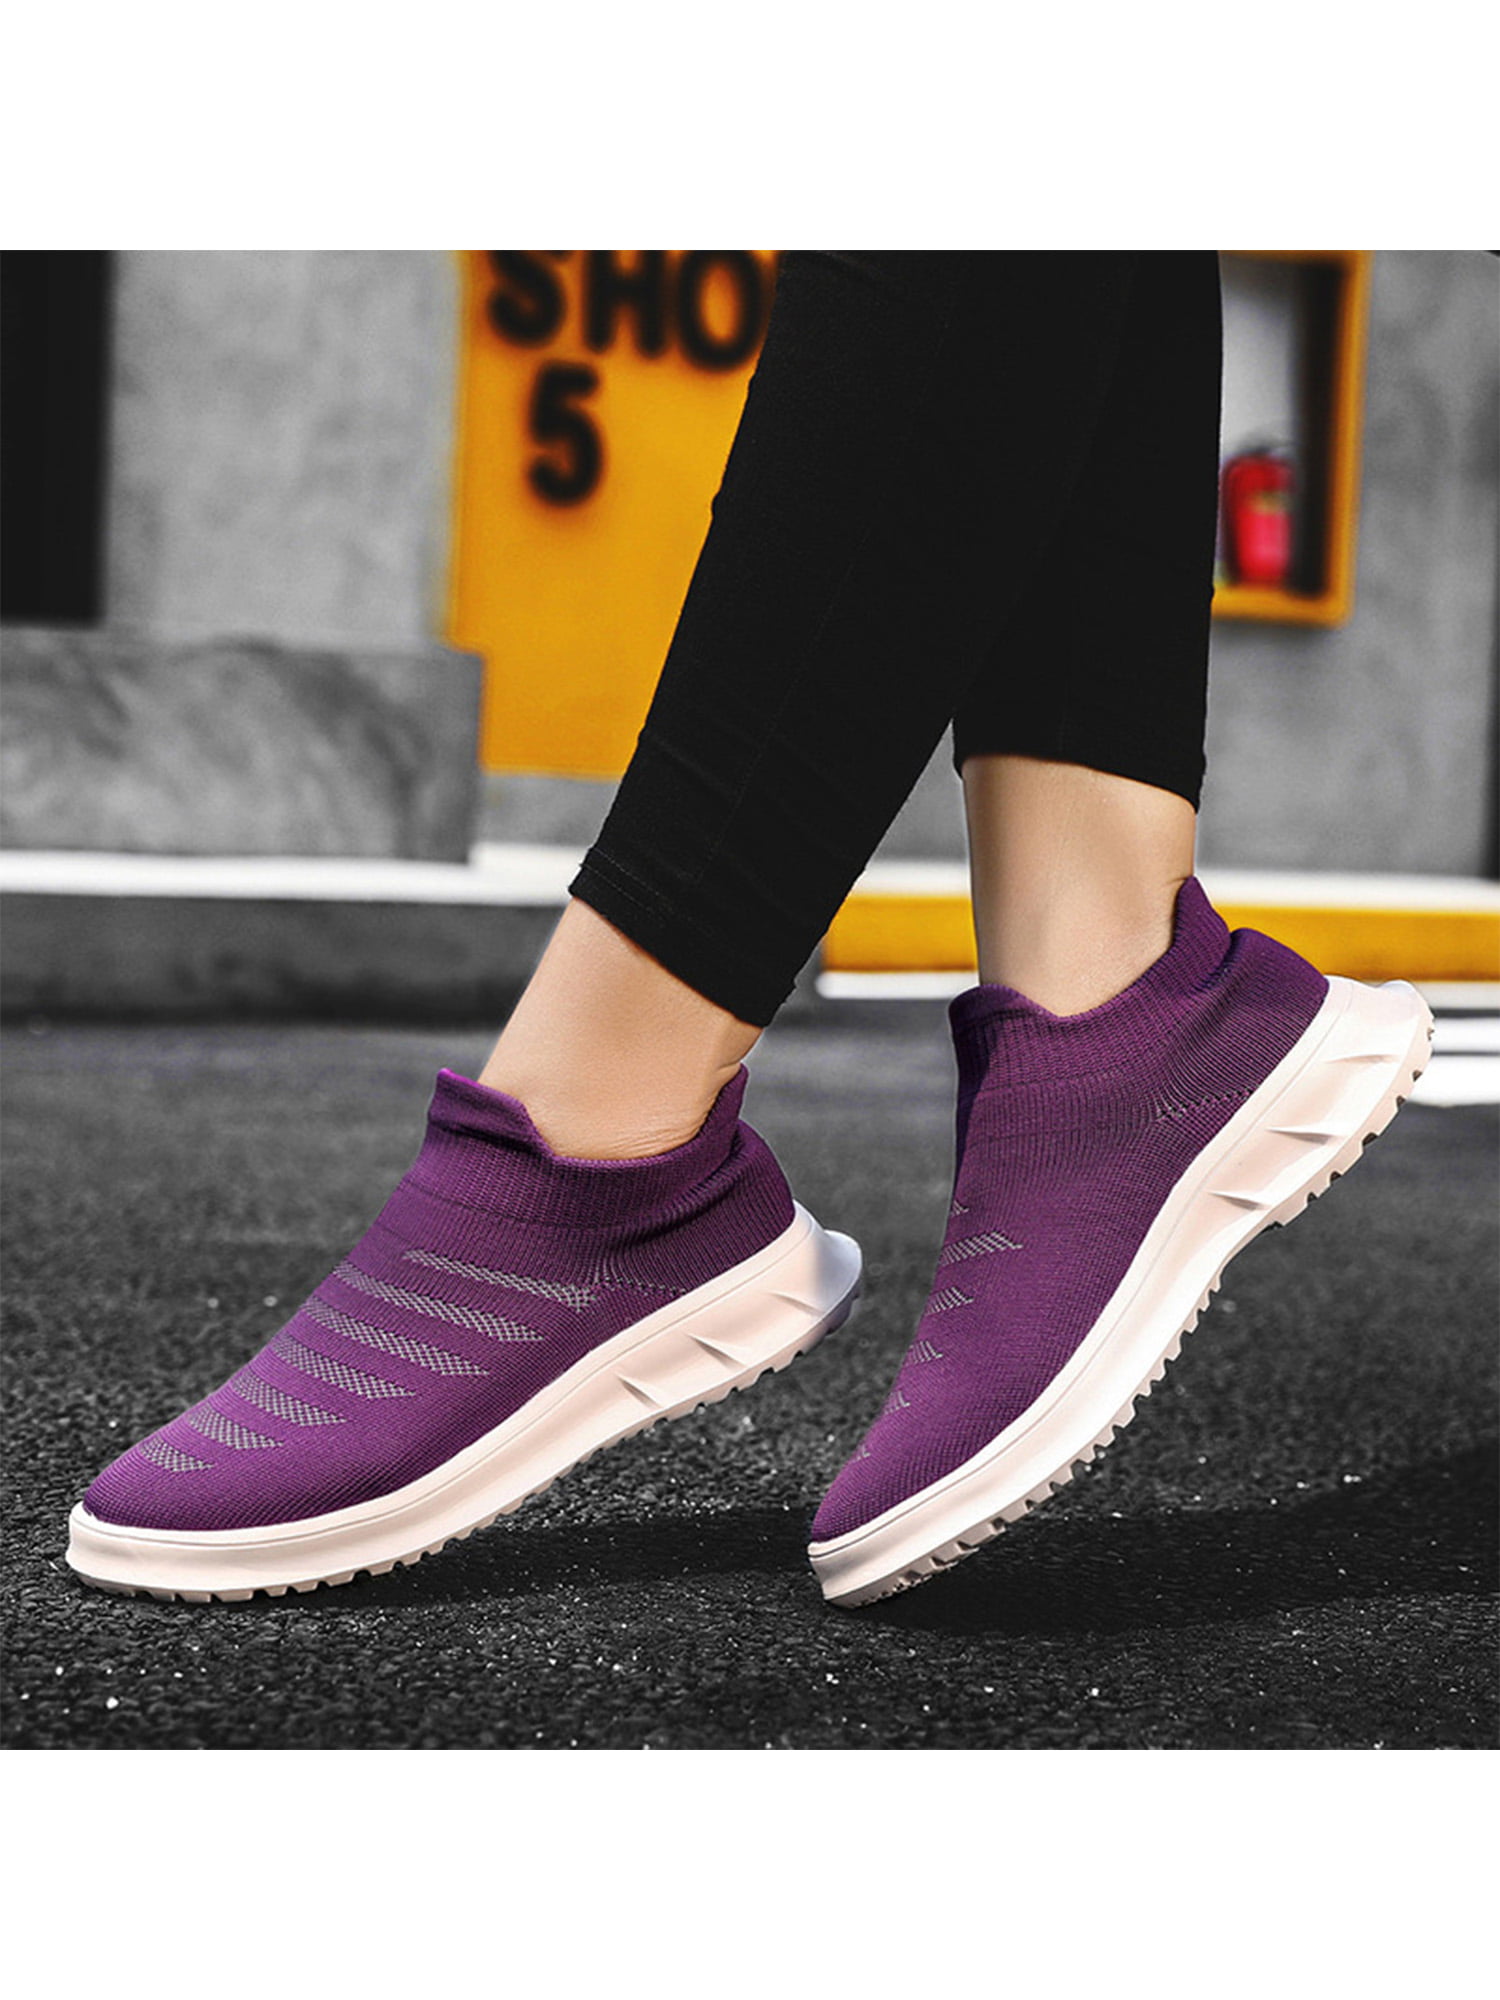 Womens Walking Tennis Sneakers,Mesh Breathable Flying Woven Socks Shoes Lazy Flat Casual Boat Shoes 